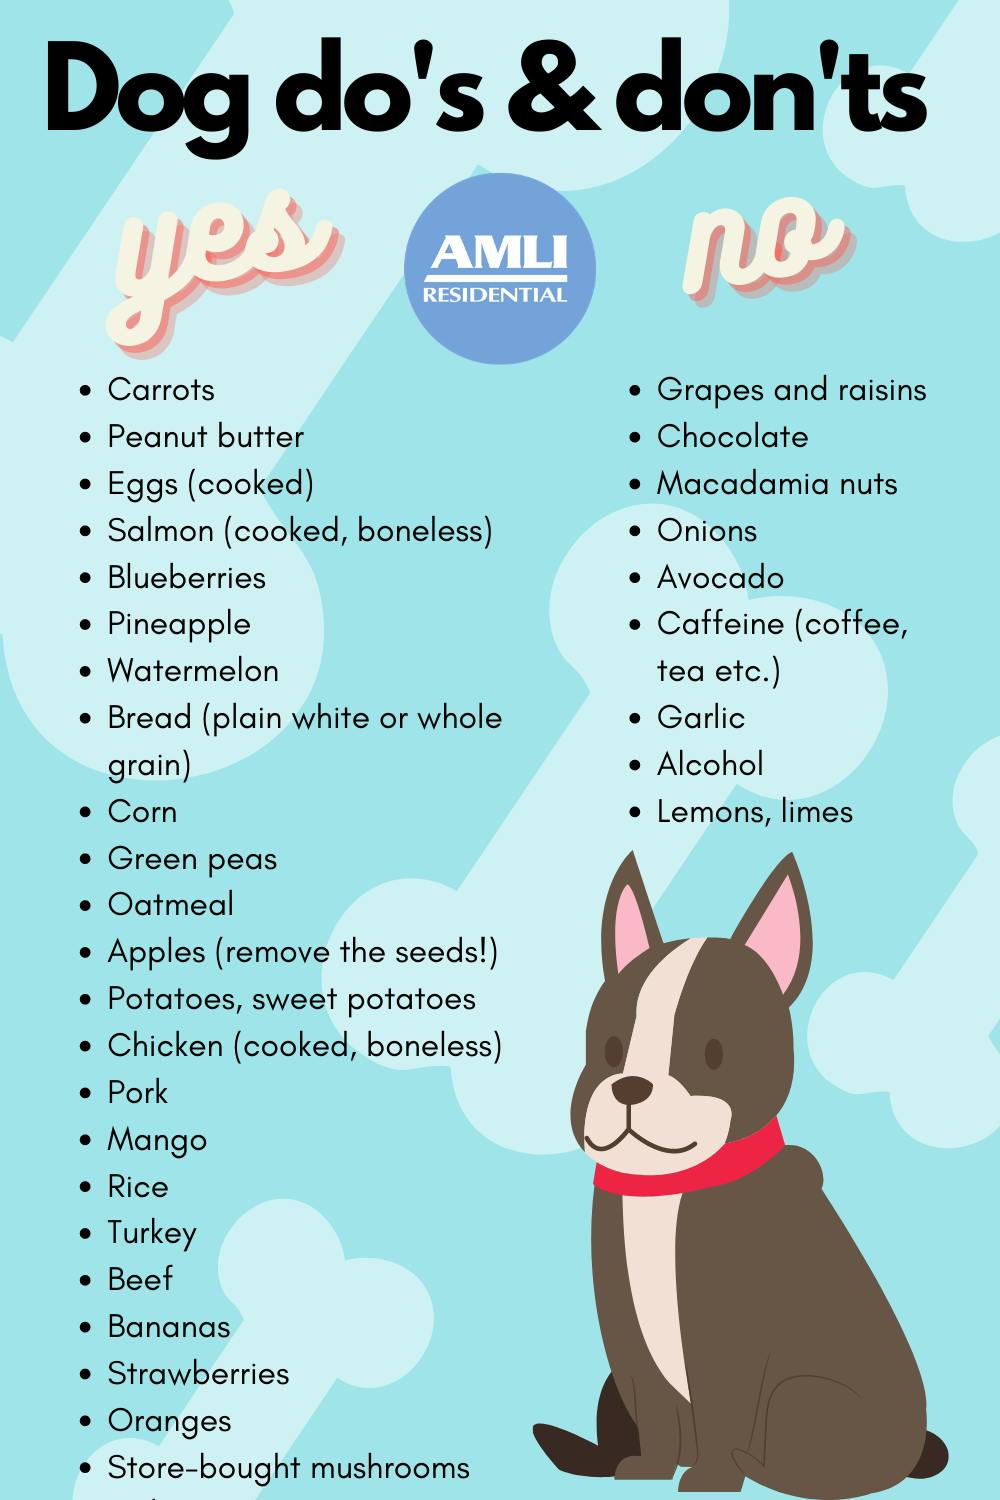 Stay Healthy and Active' Dog Treats